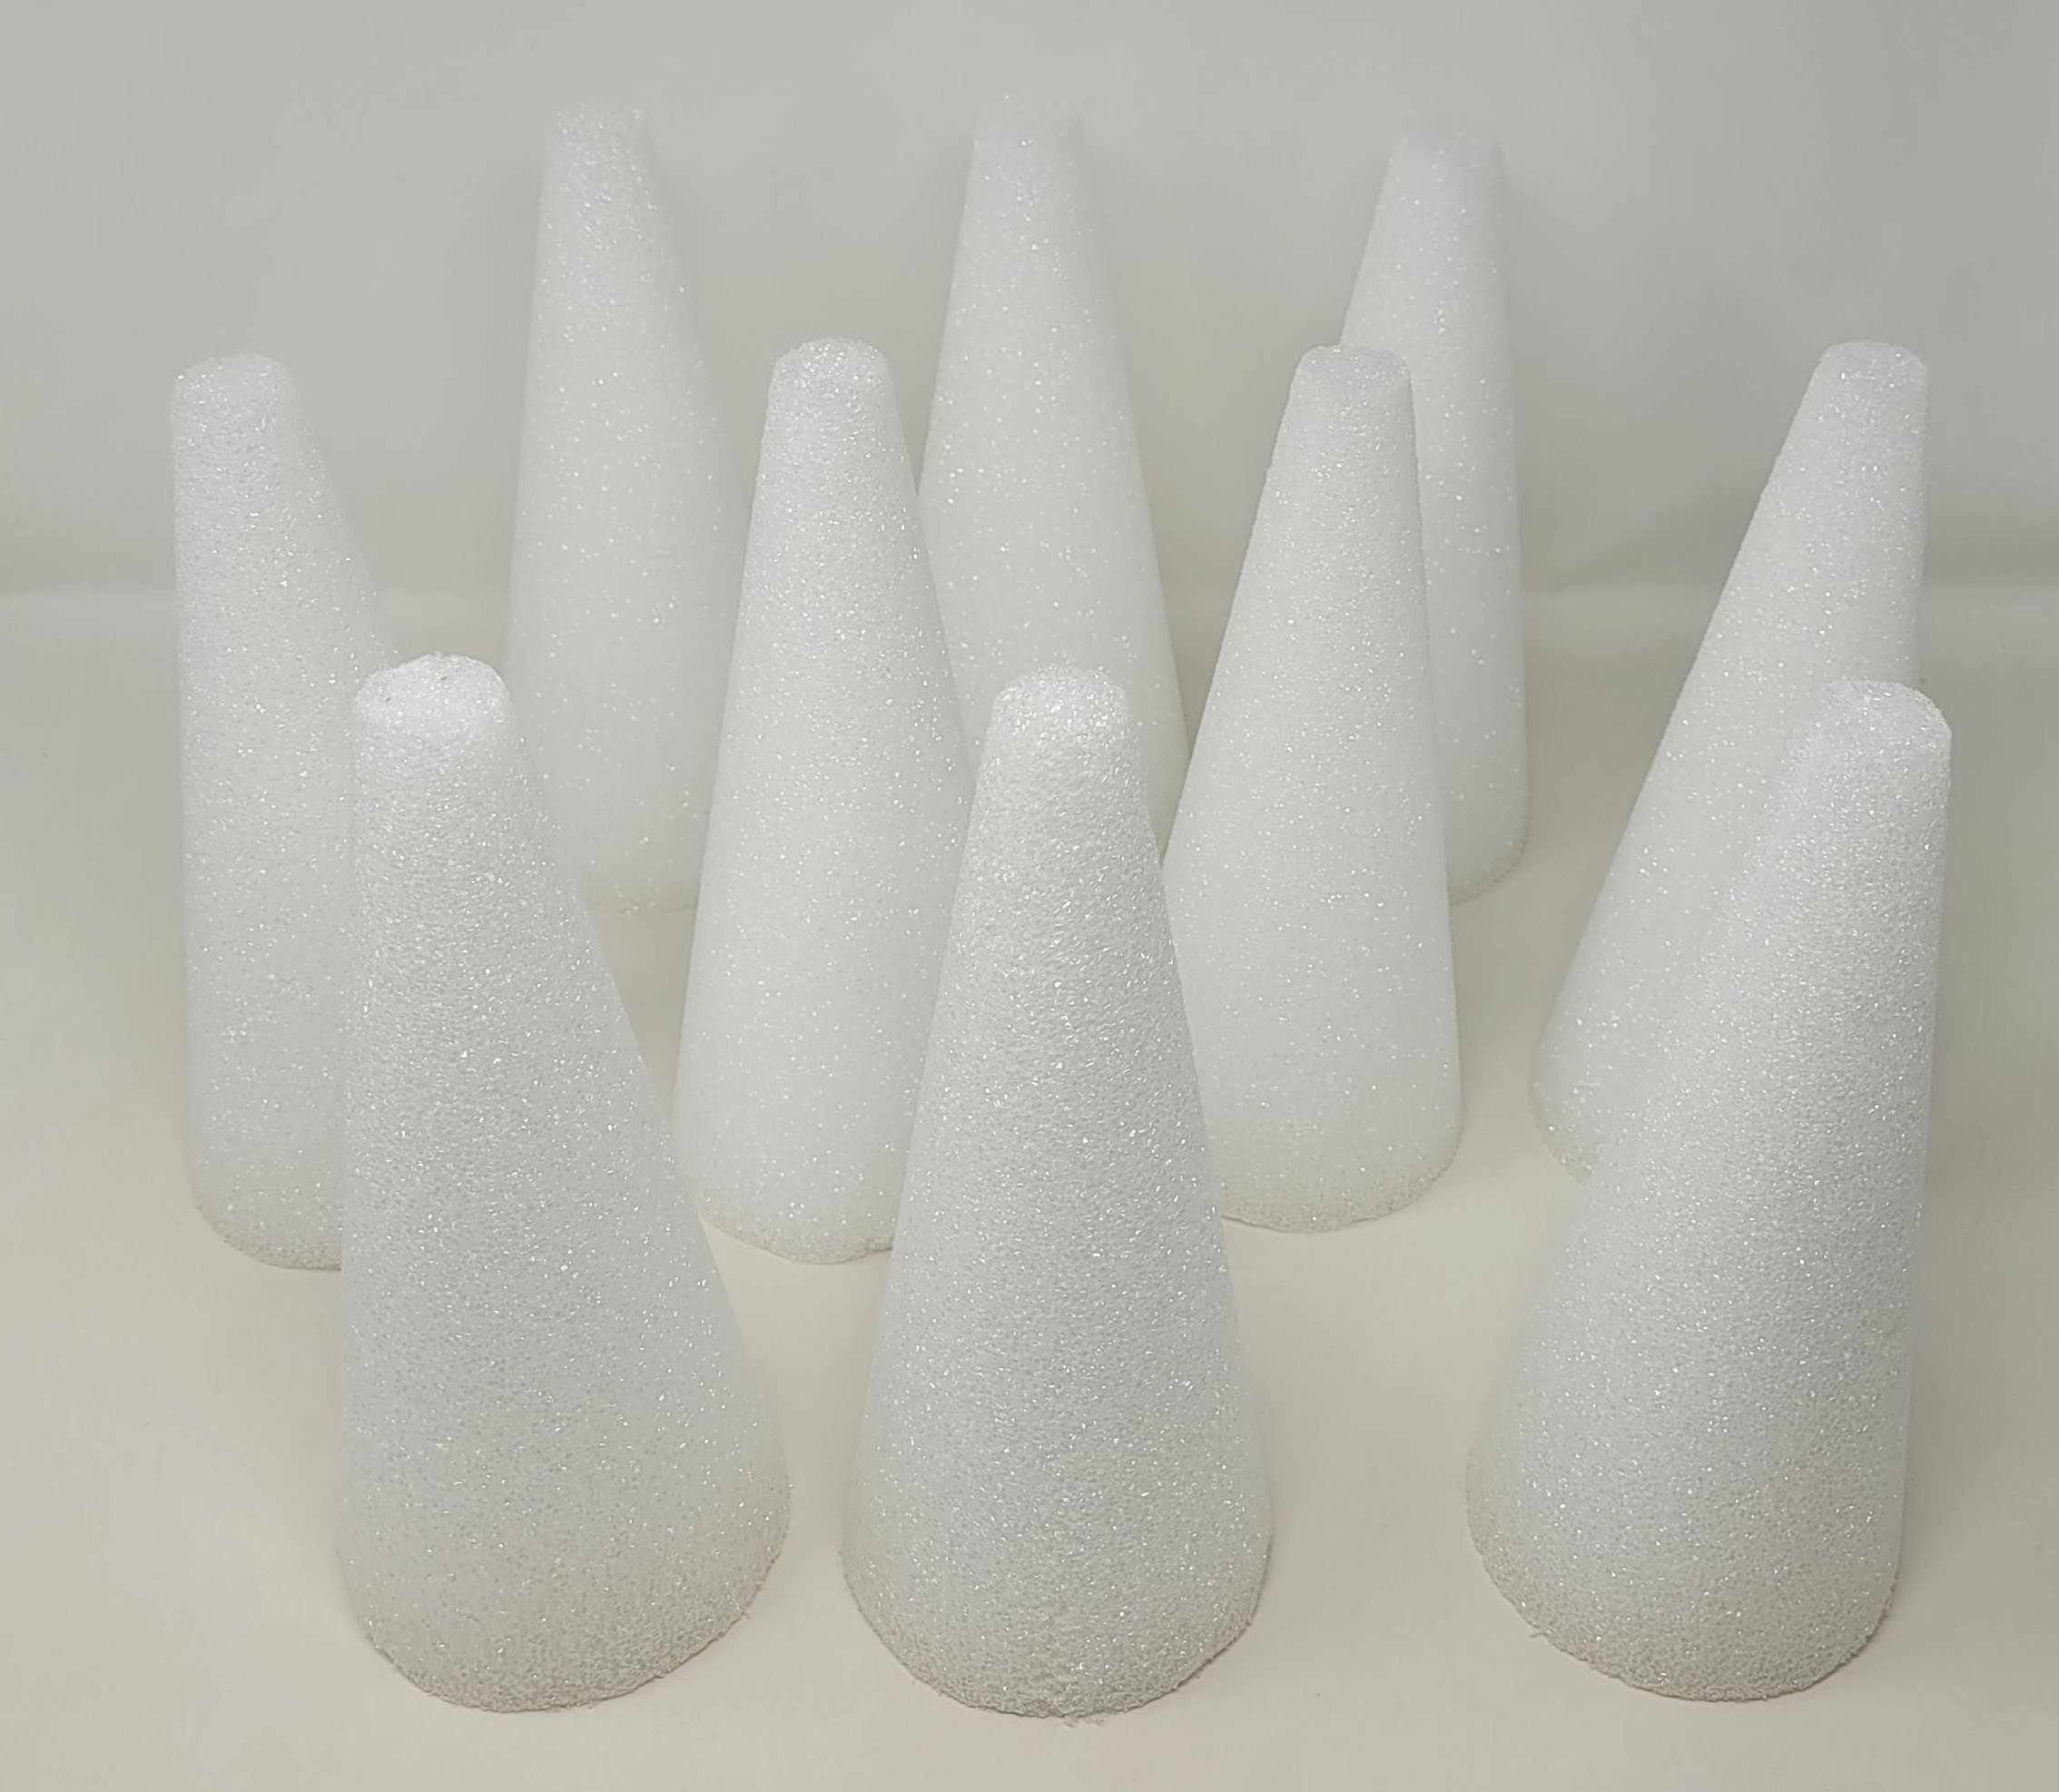 Large Styrofoam Cone, Polystyrene Cone, Wide Diameter Cone, Height 12.5 13  Inches Approximately, Diameter 7.87 Inches Approximately 